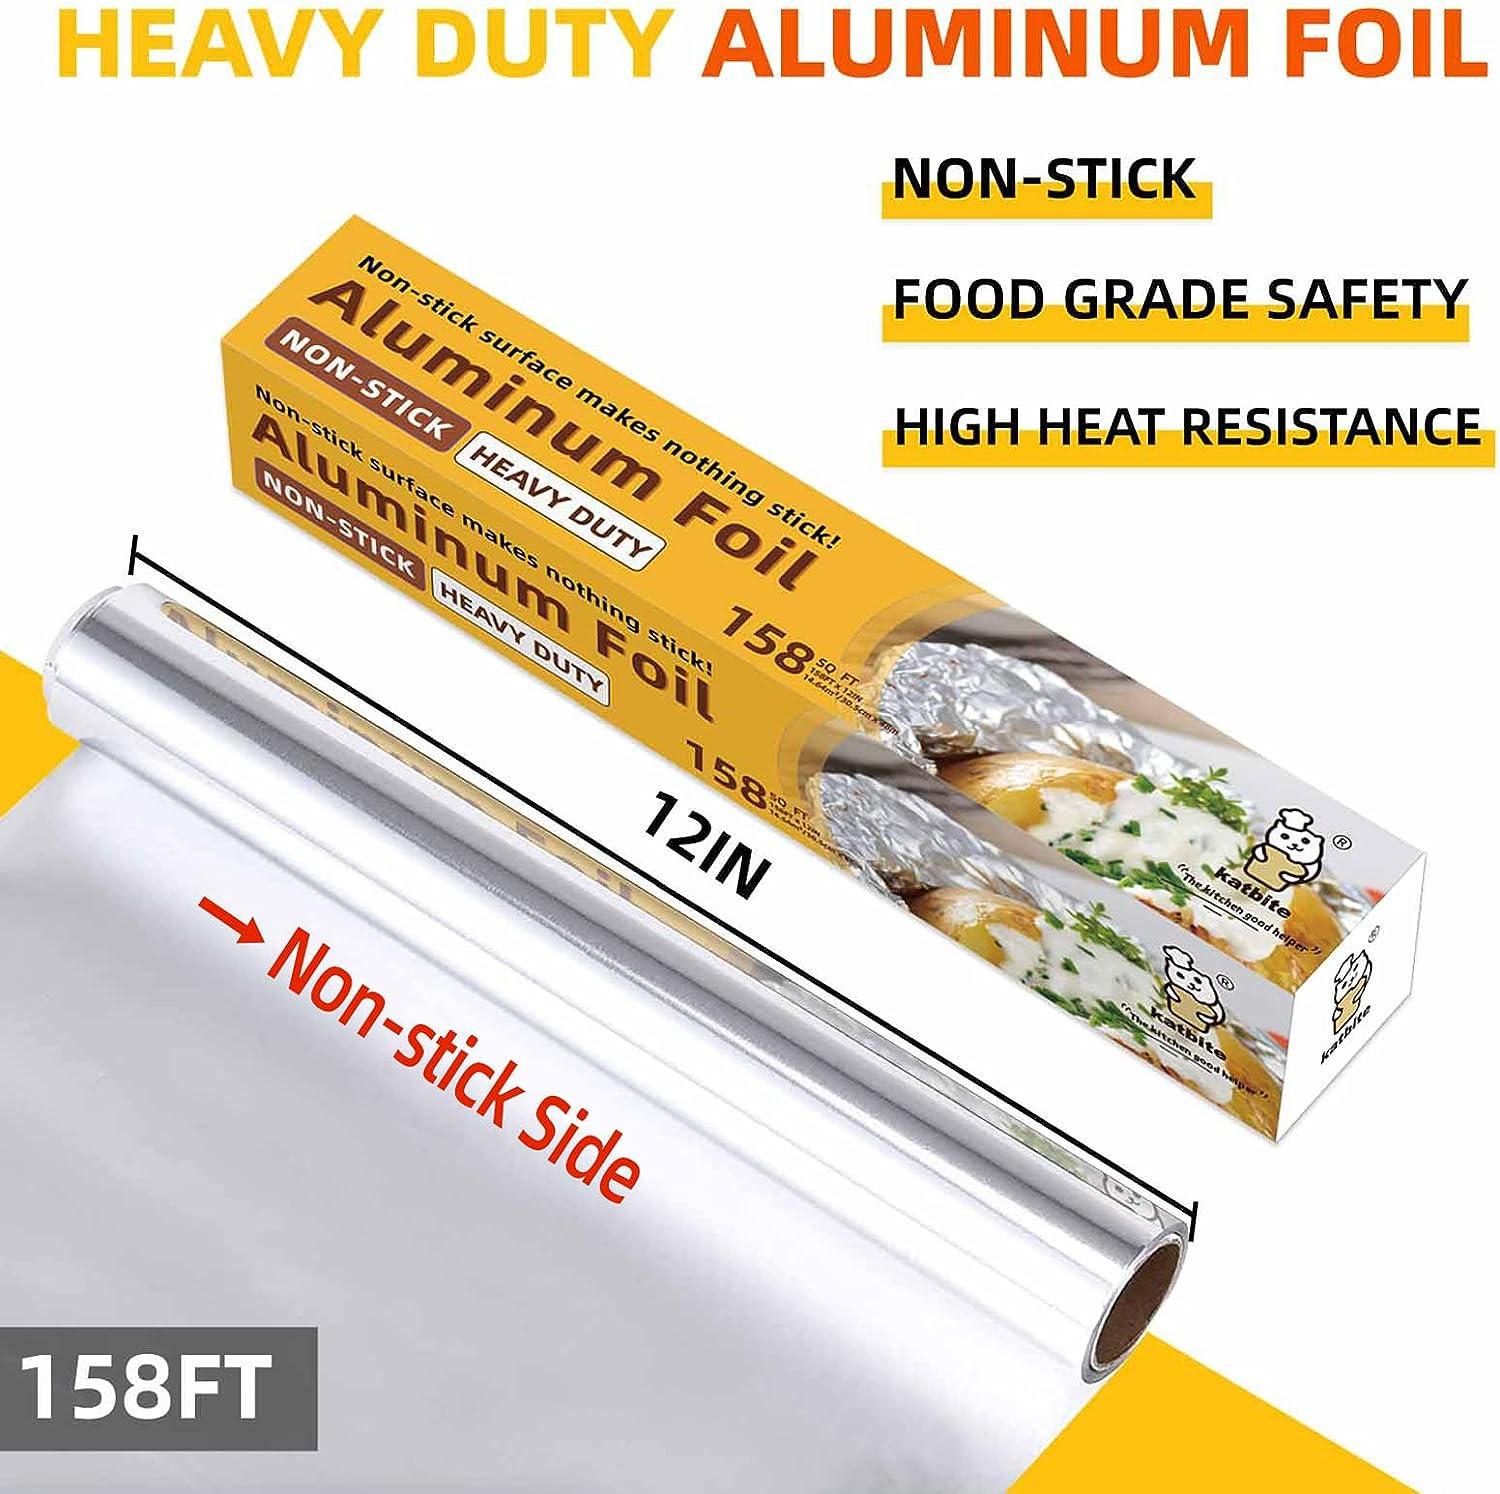 8x8 Aluminum Foil Pans with Lids - 15 Pack Square Disposable Heavy Duty  Aluminum Baking with Covers - Disposable Baking Pans for Air Fryer, Oven